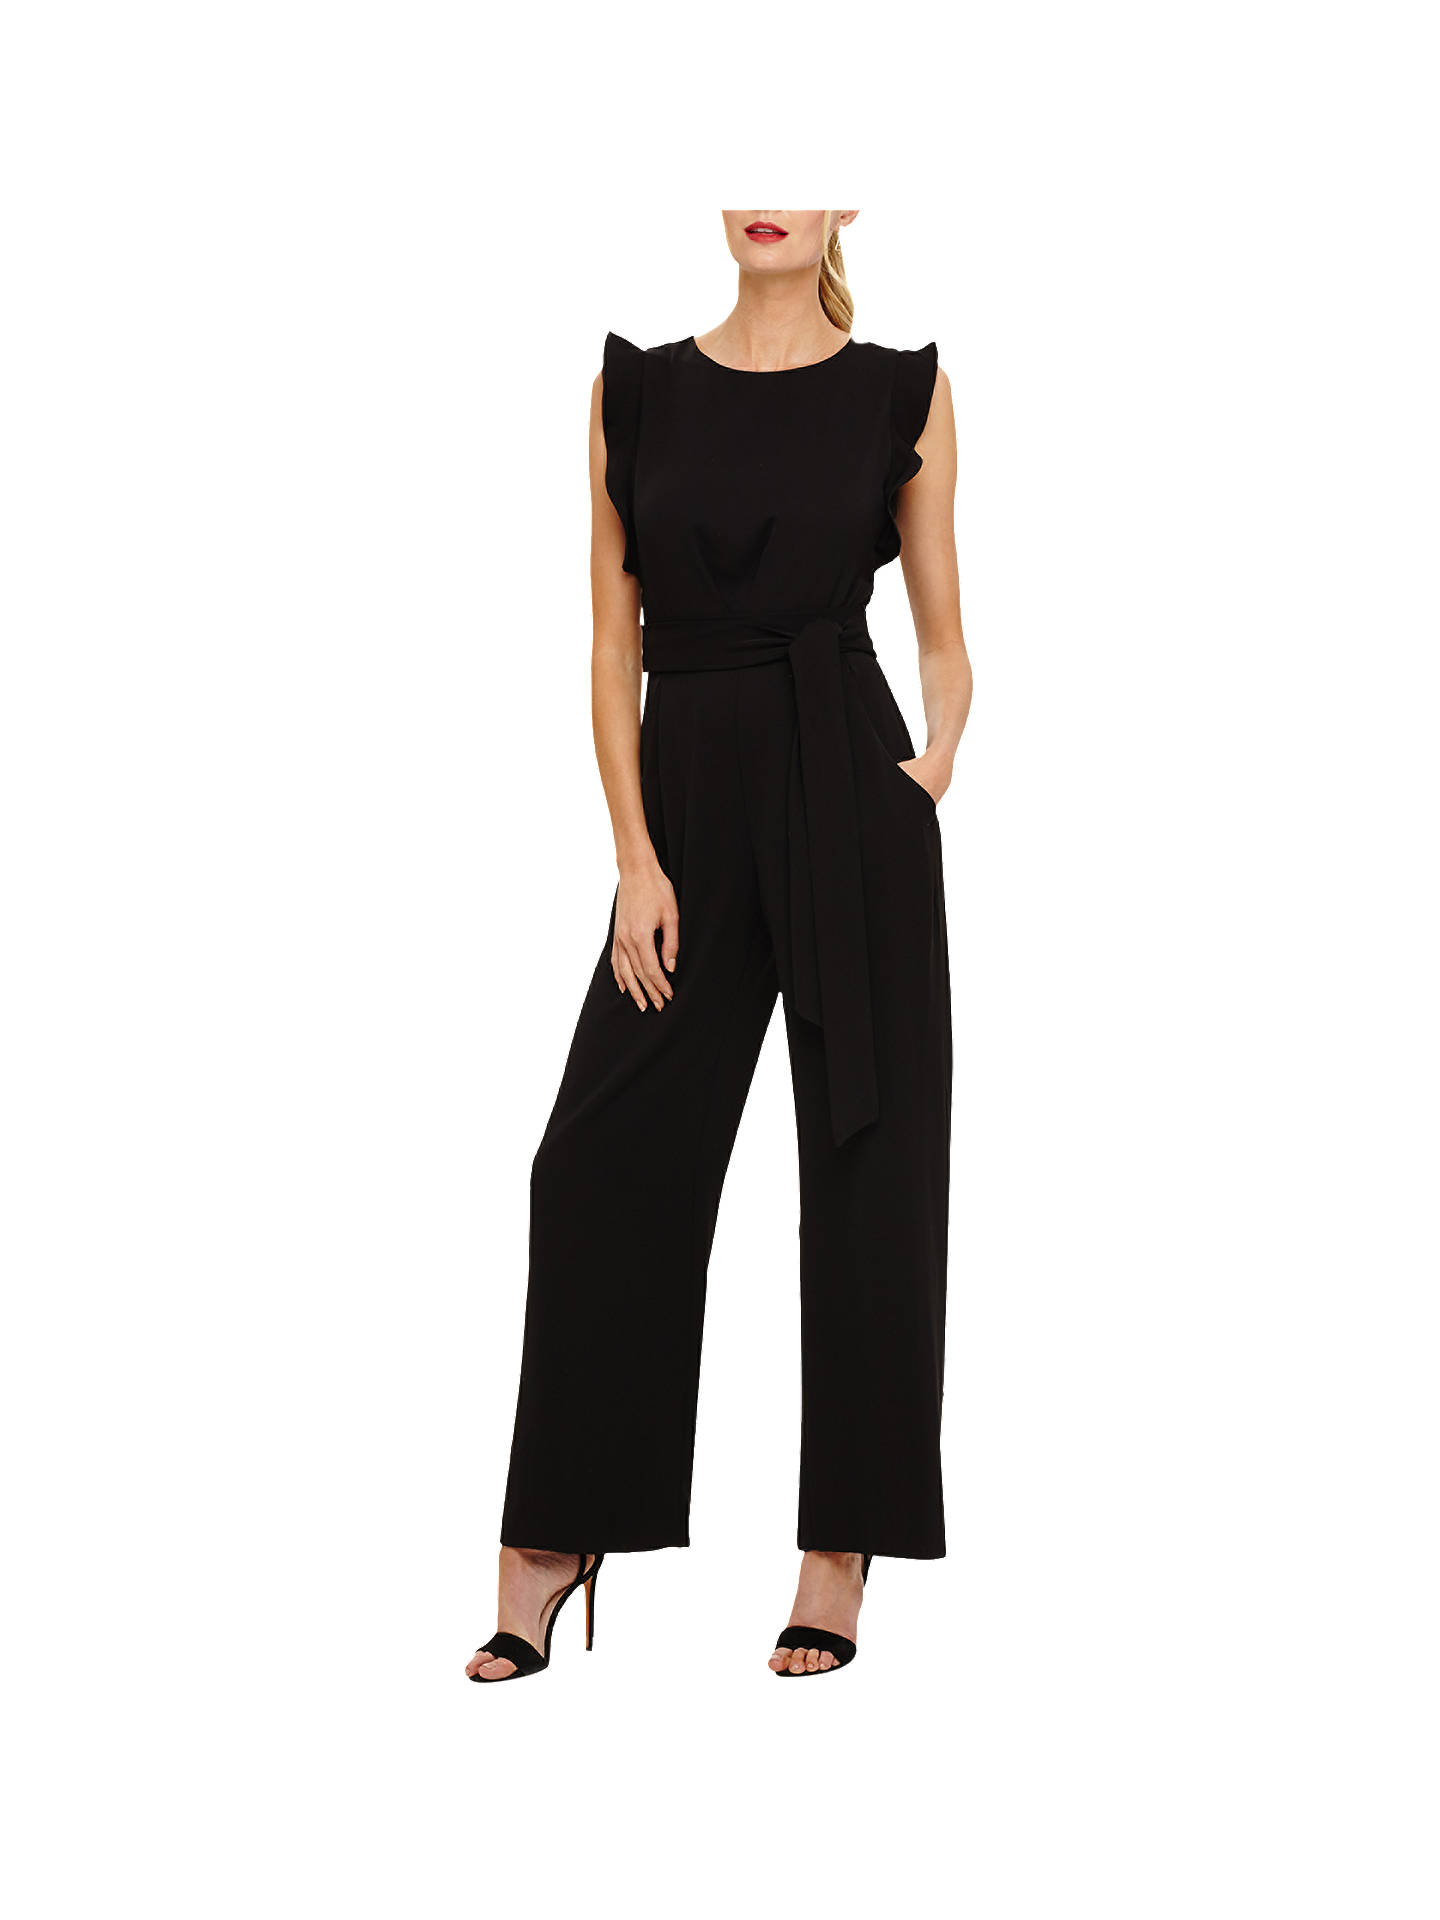 Phase Eight Victoriana Jumpsuit, Black by Phase Eight